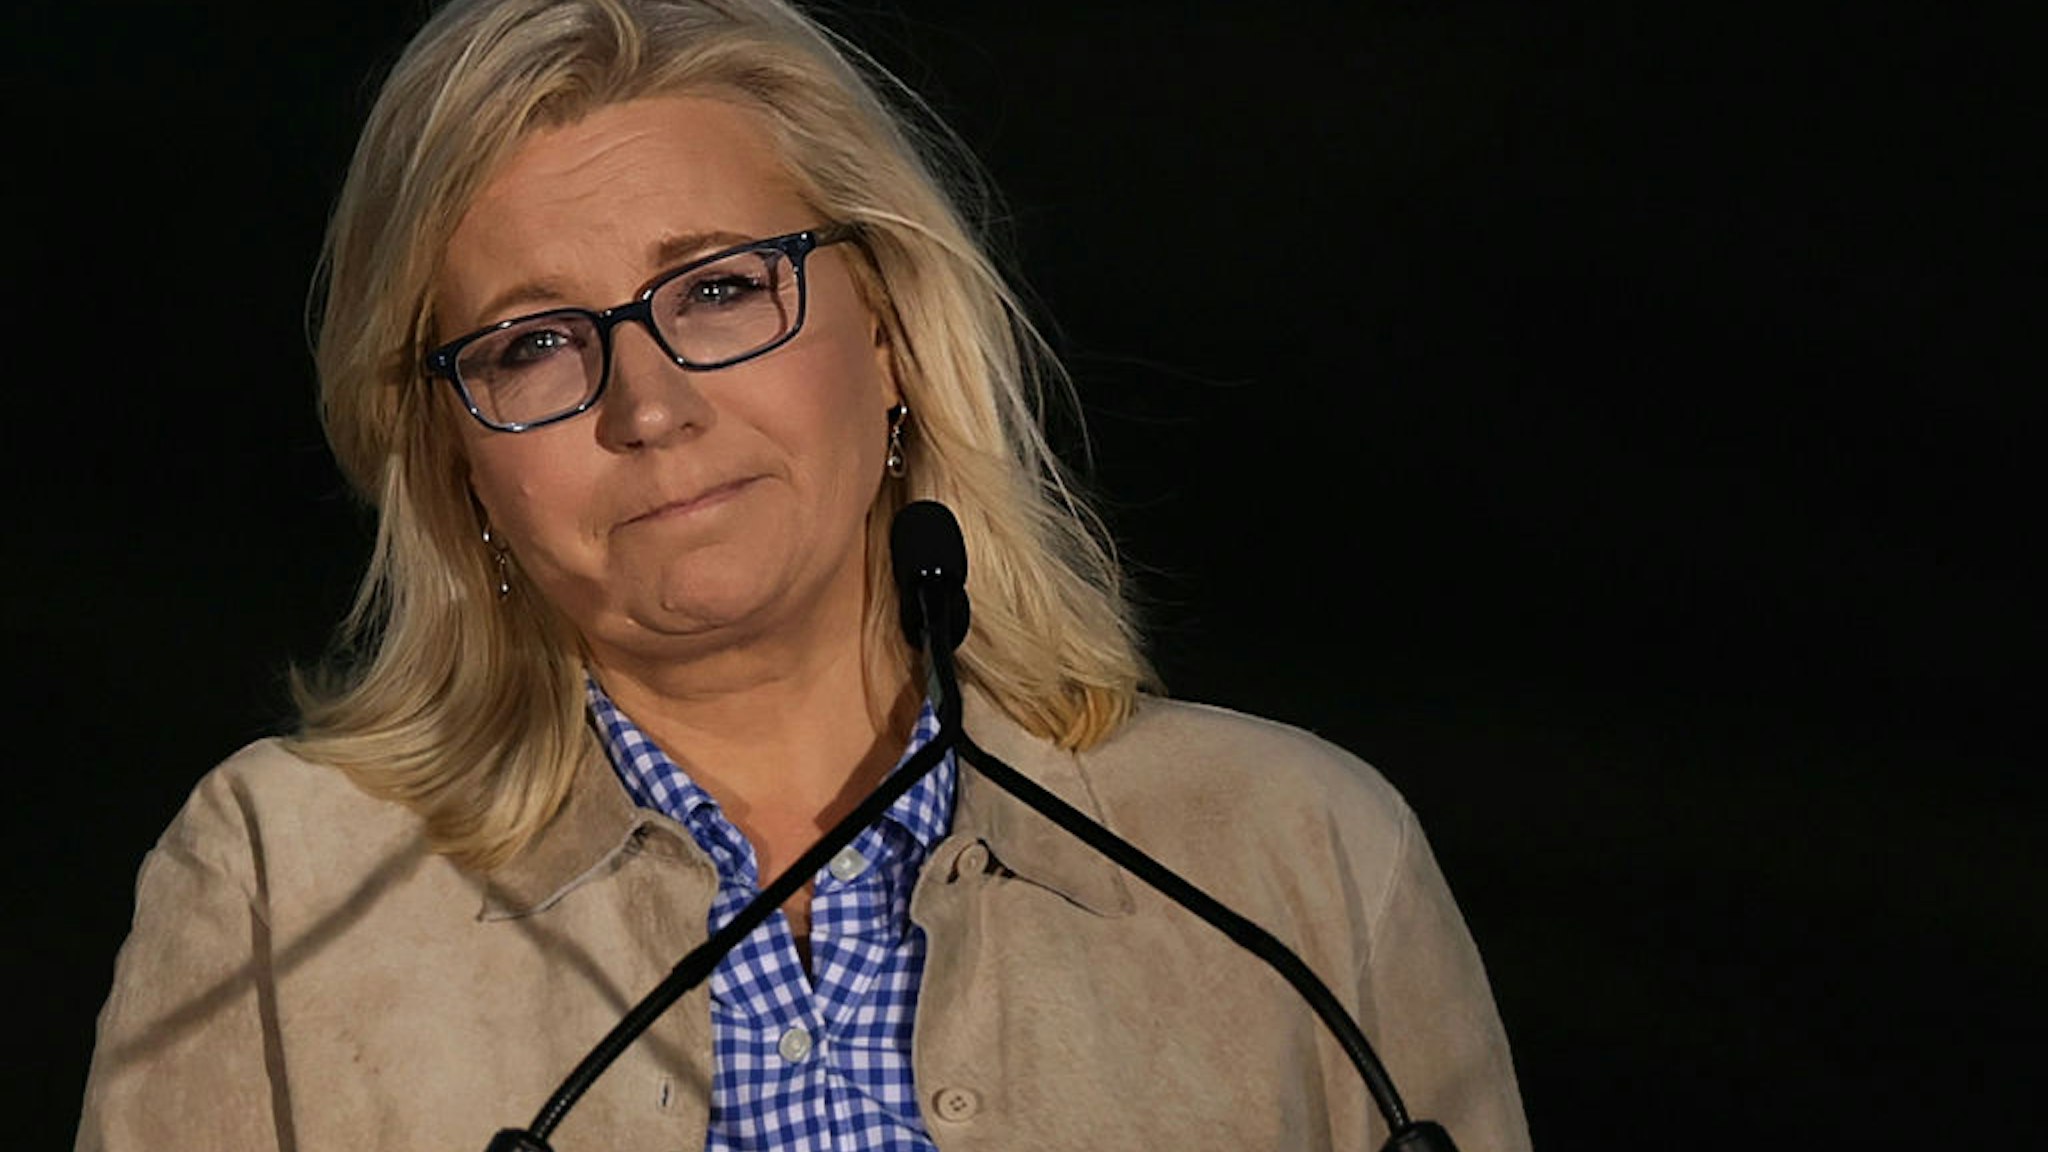 JACKSON, WYOMING - AUGUST 16: U.S. Rep. Liz Cheney (R-WY) gives a concession speech to supporters during a primary night event on August 16, 2022 in Jackson, Wyoming. Rep. Cheney was defeated in her primary race by Wyoming Republican congressional candidate Harriet Hageman. (Photo by Alex Wong/Getty Images)